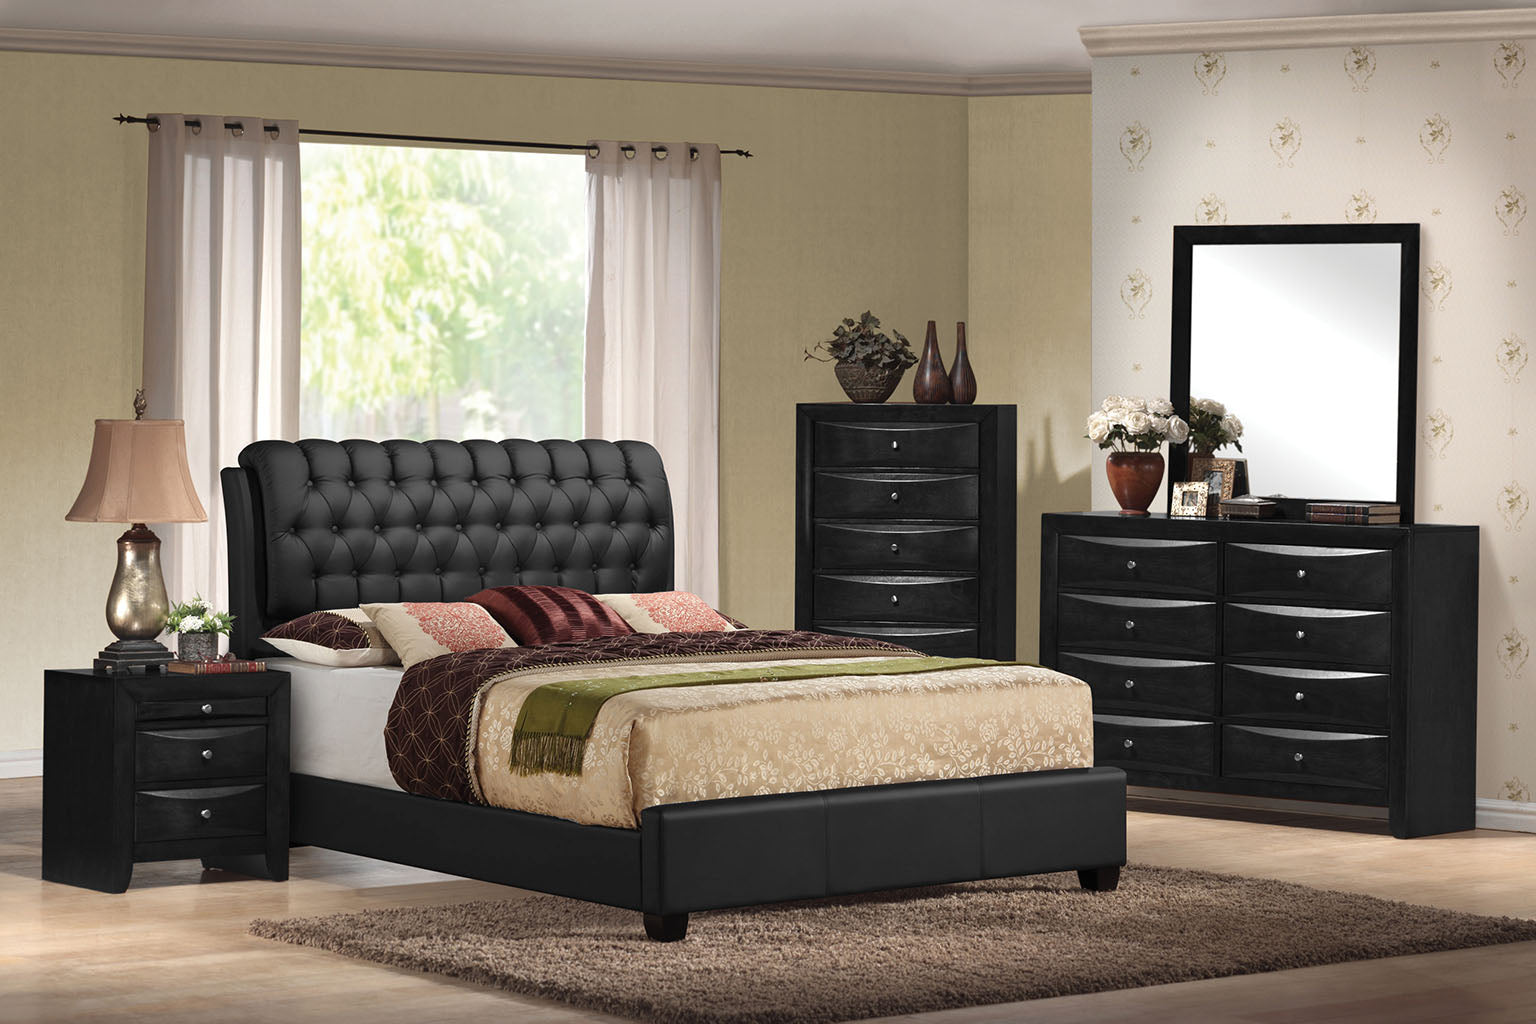 90' X 79' X 49' Black Pu Button Tufted King Bed